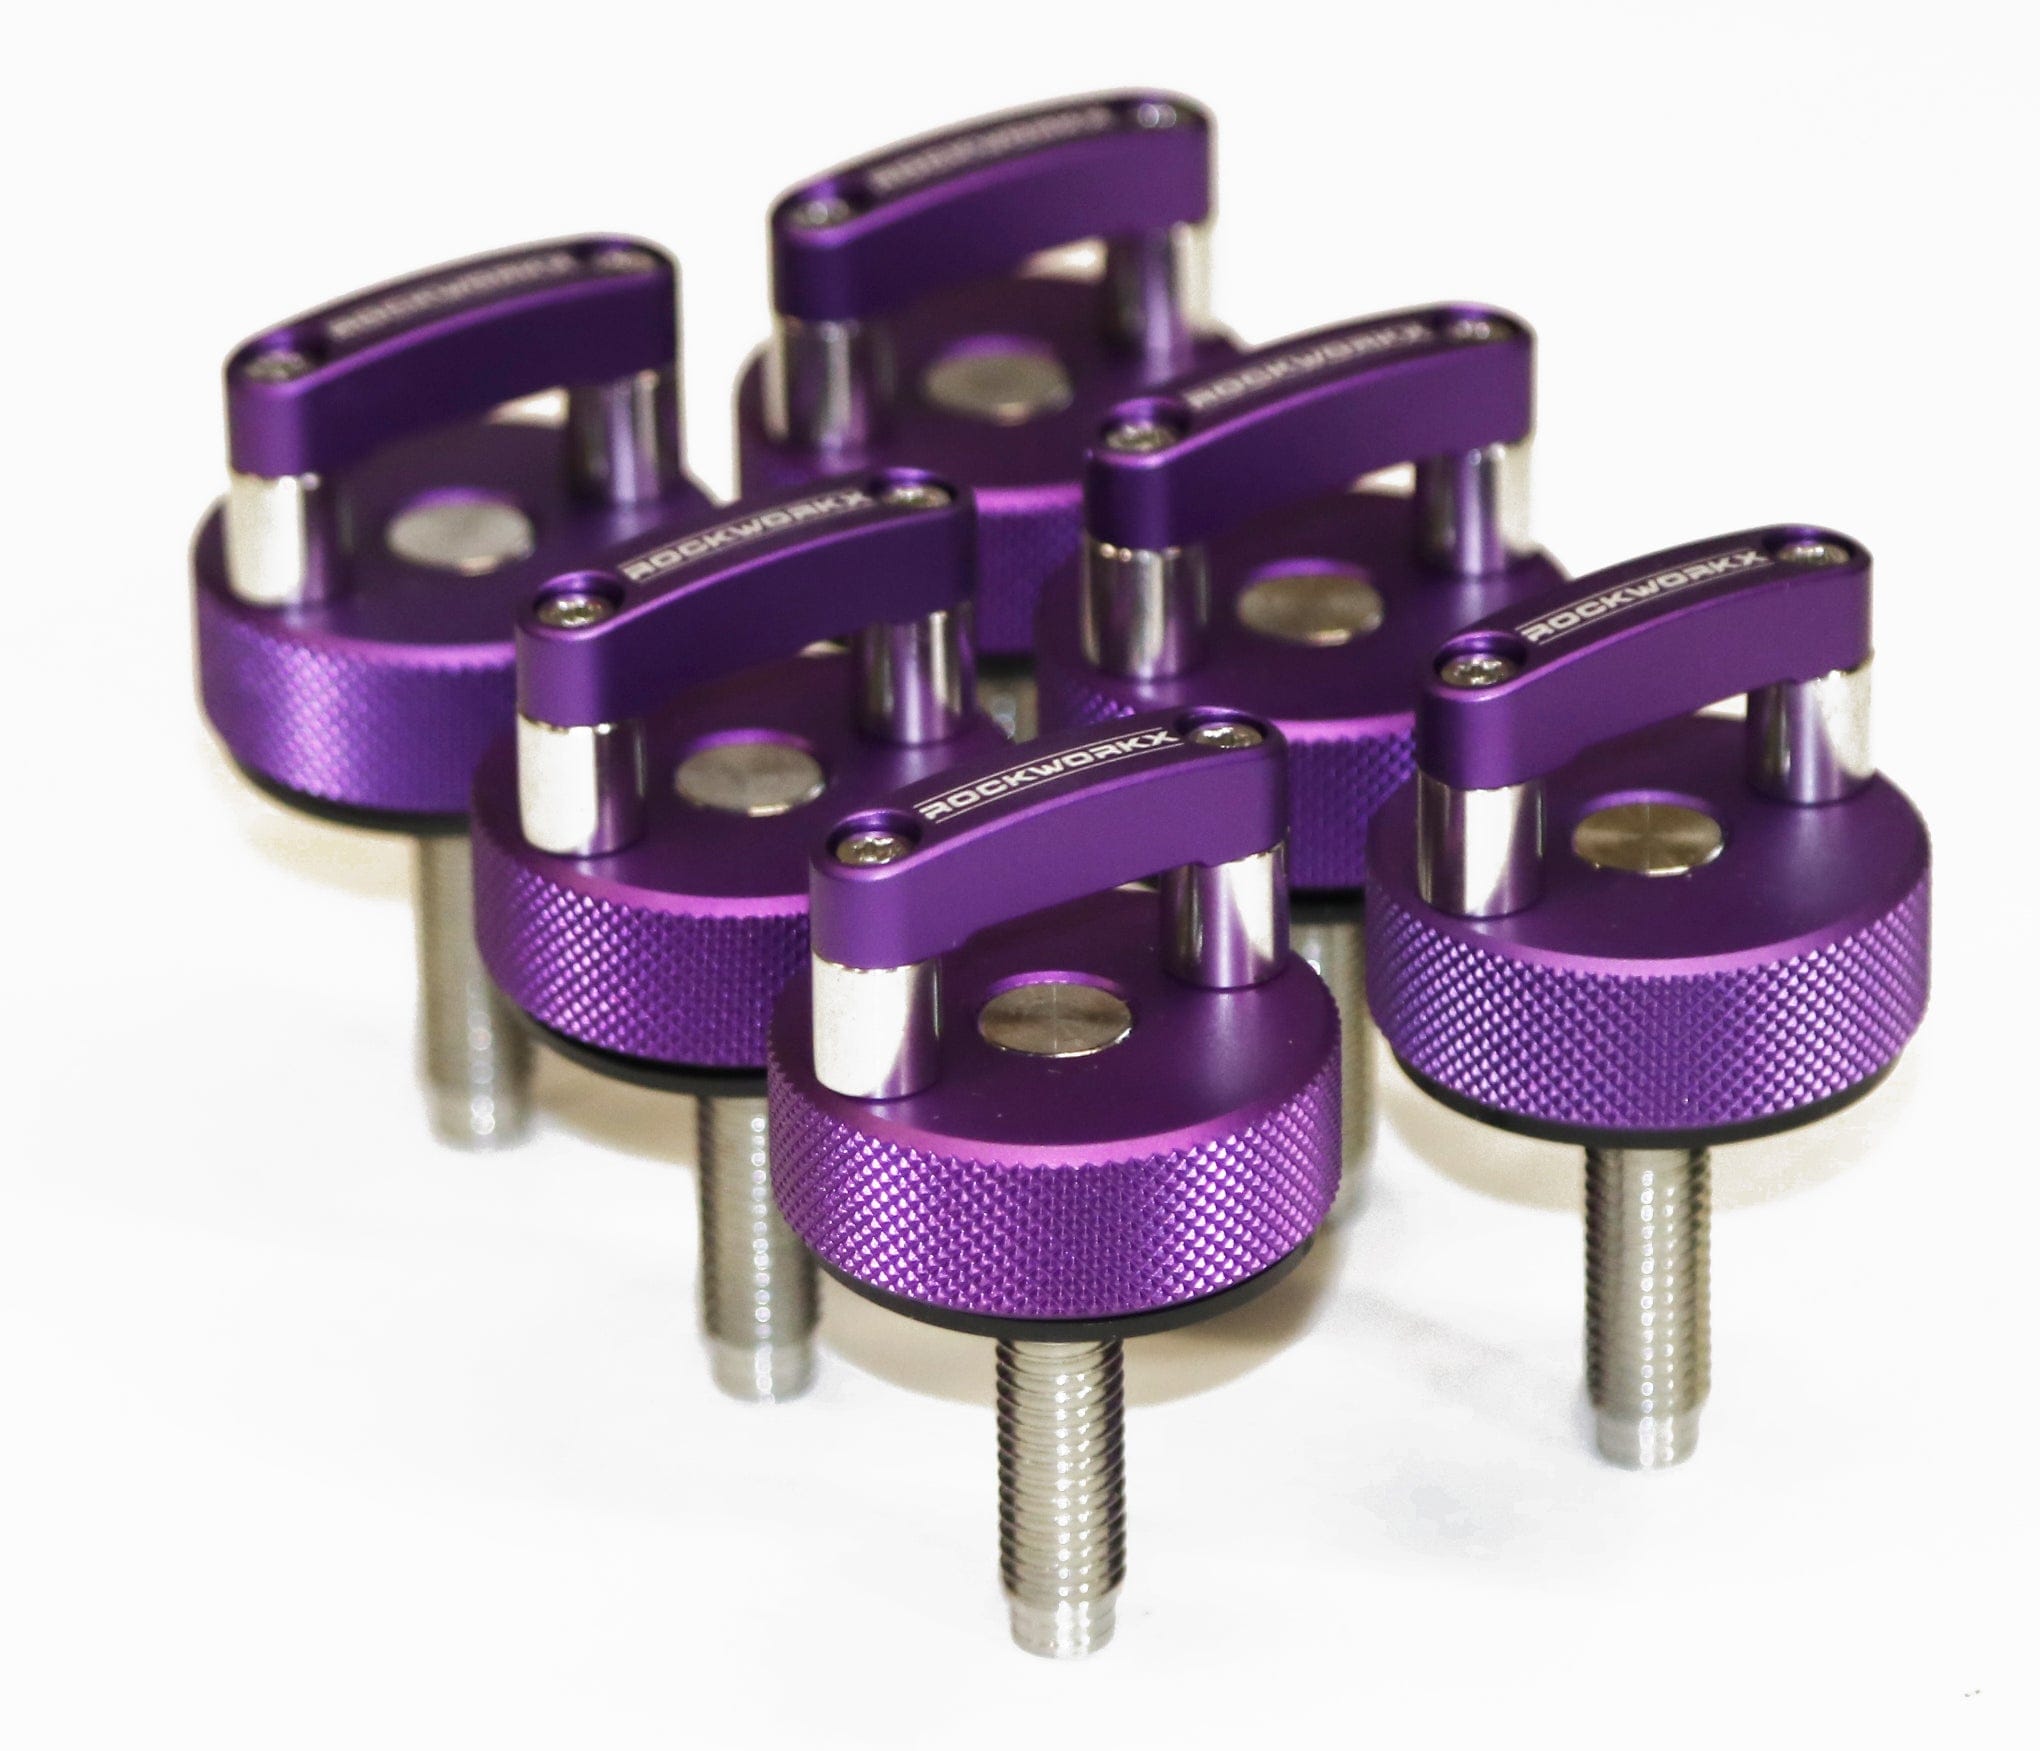 JEEP Wrangler PURPLE Hard Top Quick Removal Fastener Thumb Screw (Six Piece Set) LIMITED EDITION , Billet aluminum & Stainless steel rockworkx